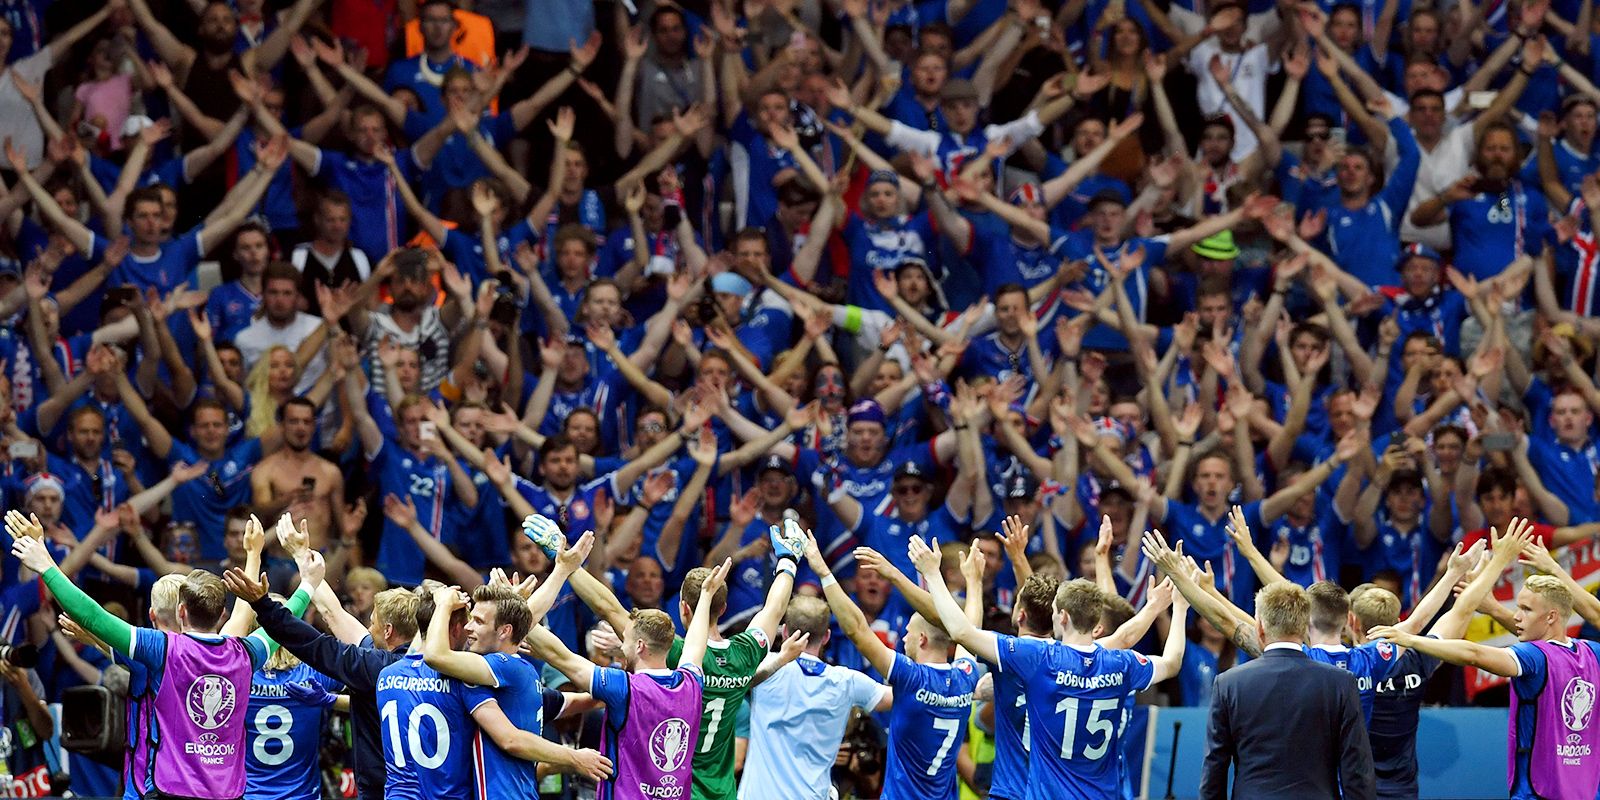 Iceland's World Cup run has enthralled a nation